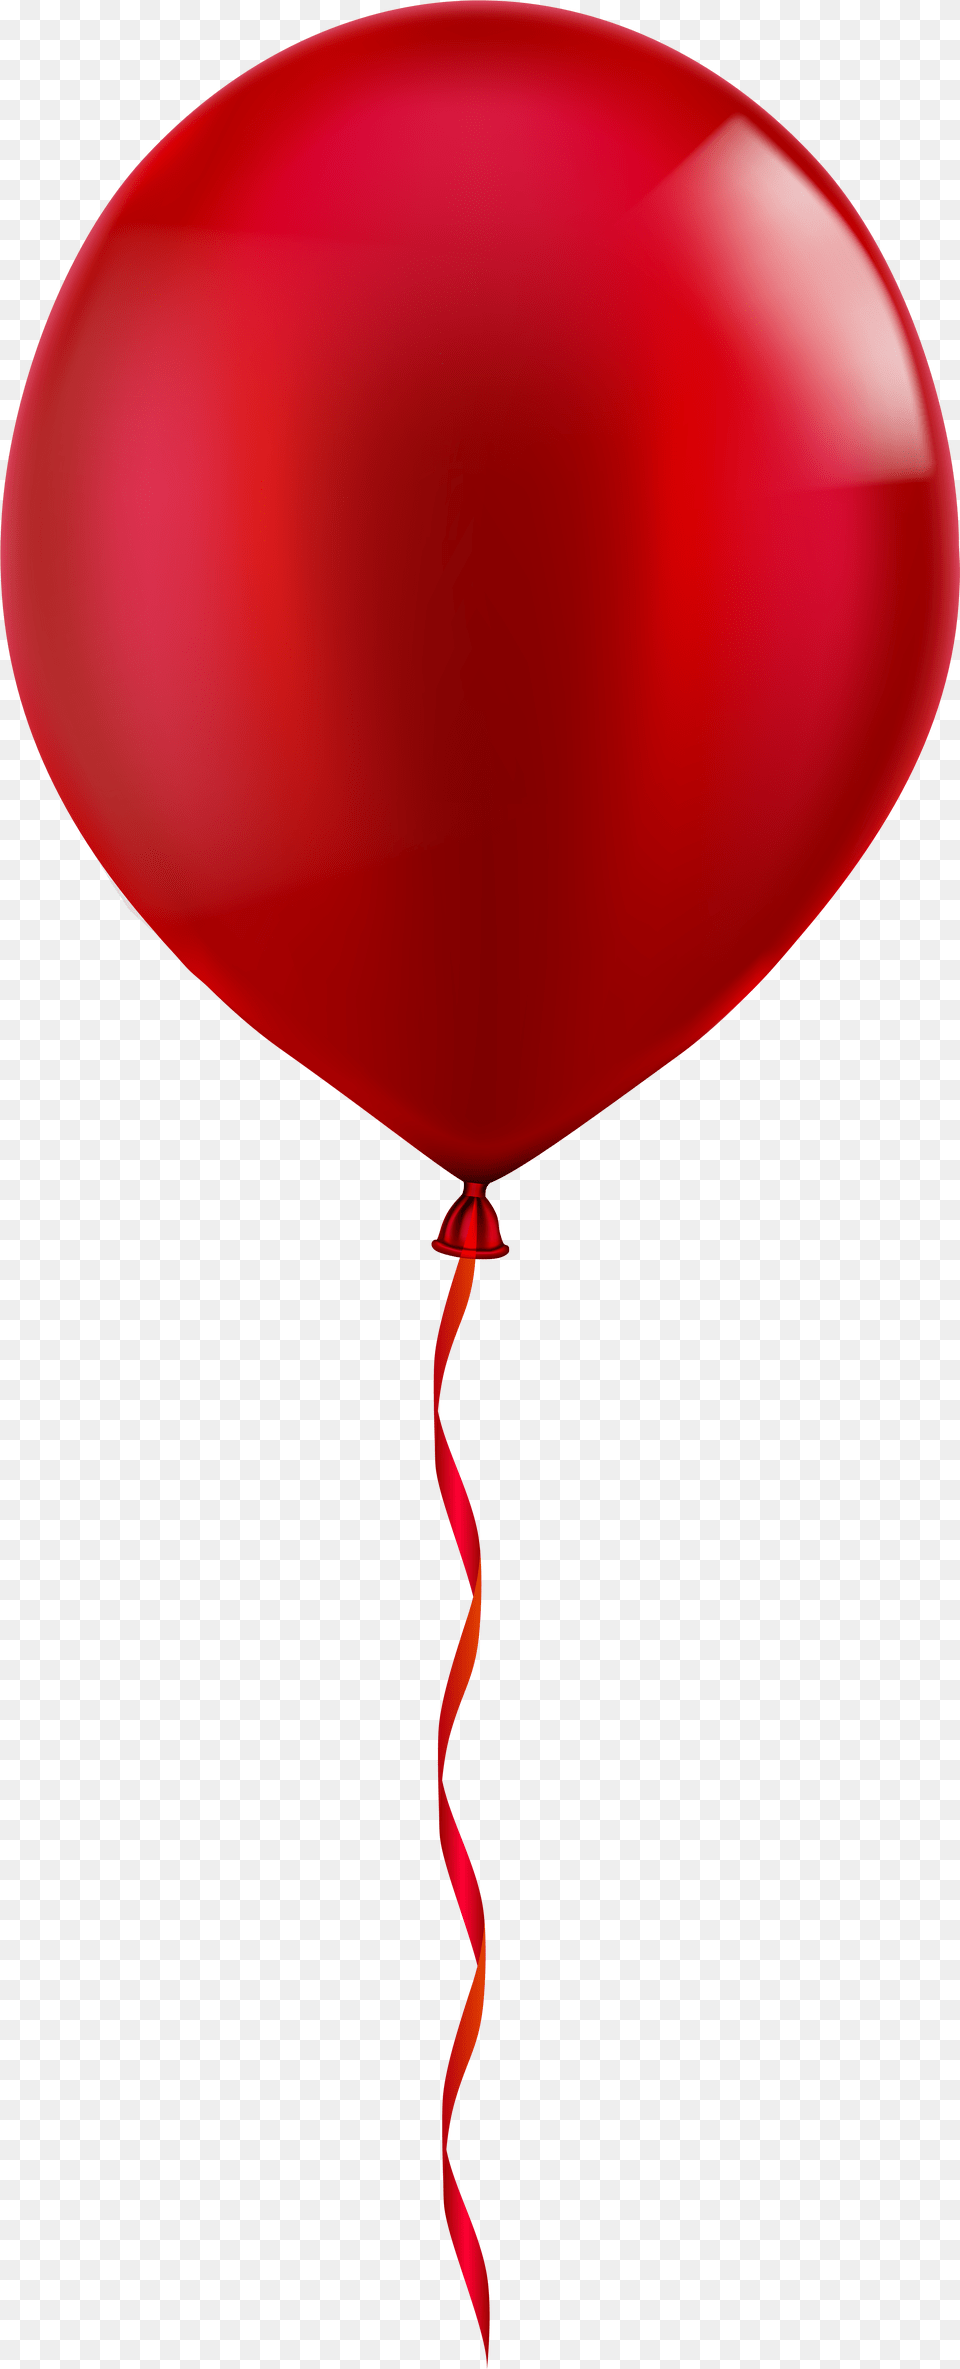 Transparent Baloons Red Balloon Clipart Free Png